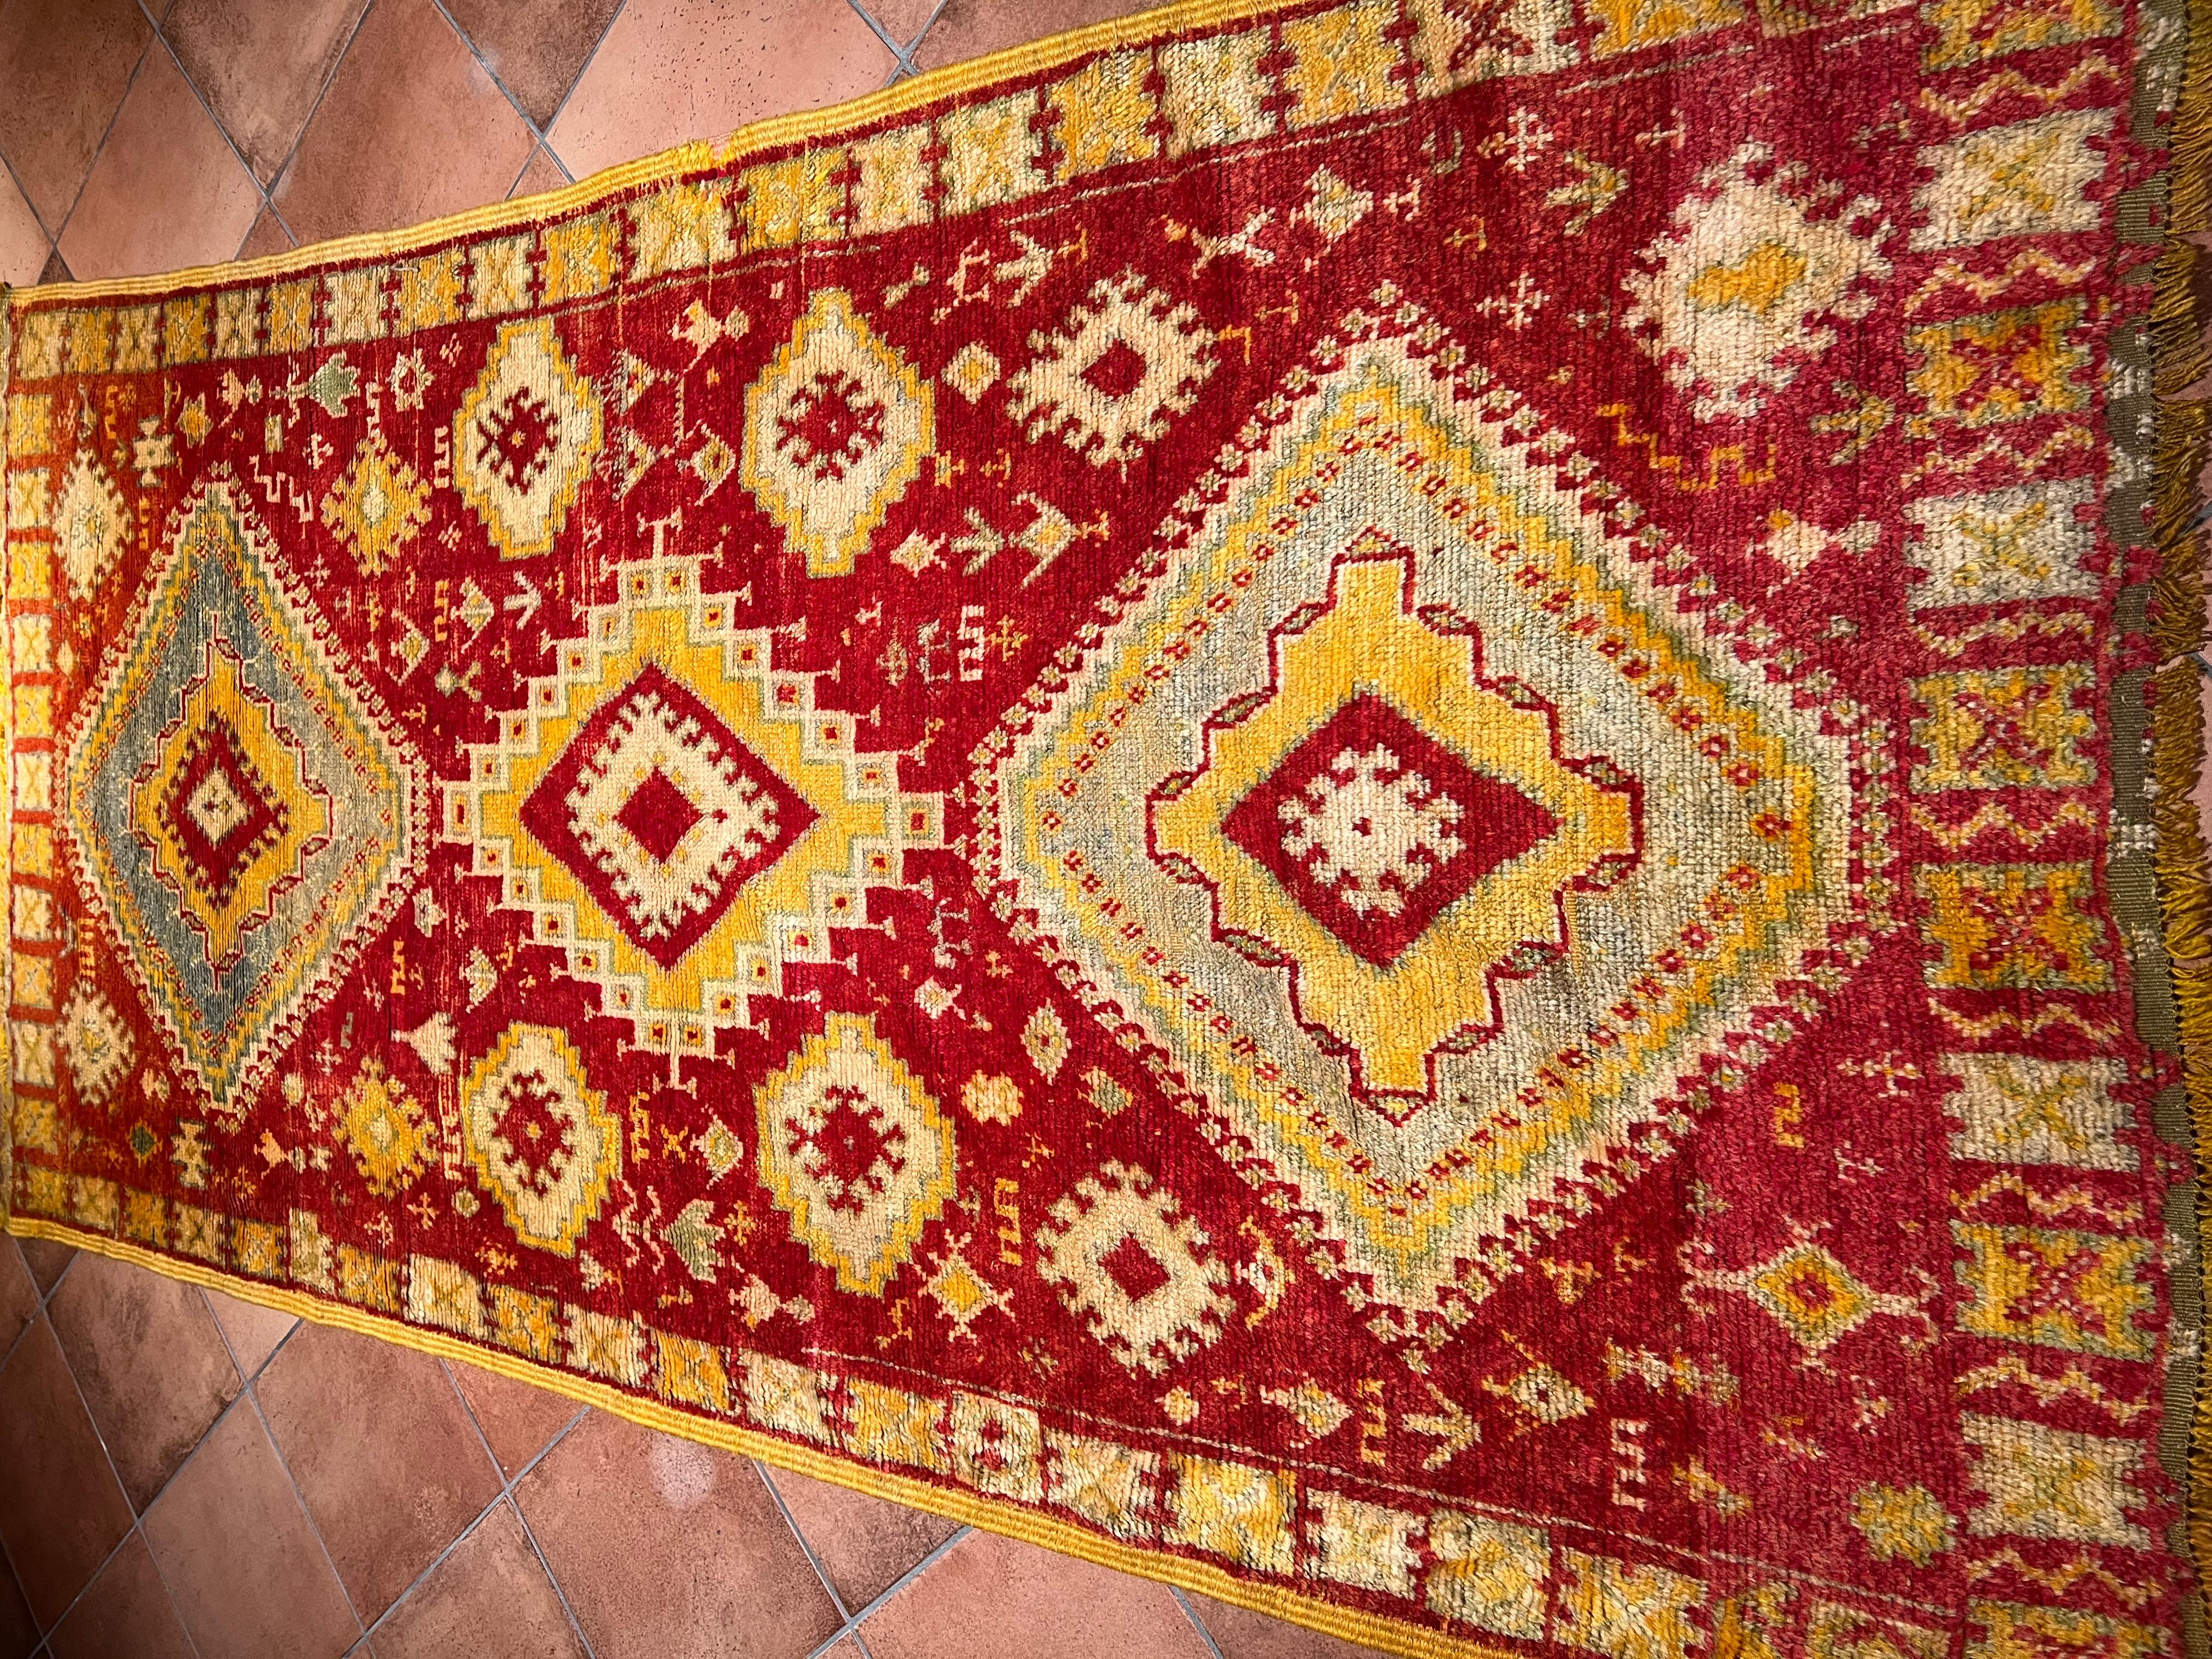 The geometric designs of Berber carpets represent a veritable coded language, handed down from mother to daughter, telling the secret story of the woman who wove it within the household hearth. The carpets feature lozenges, triangles, straight and